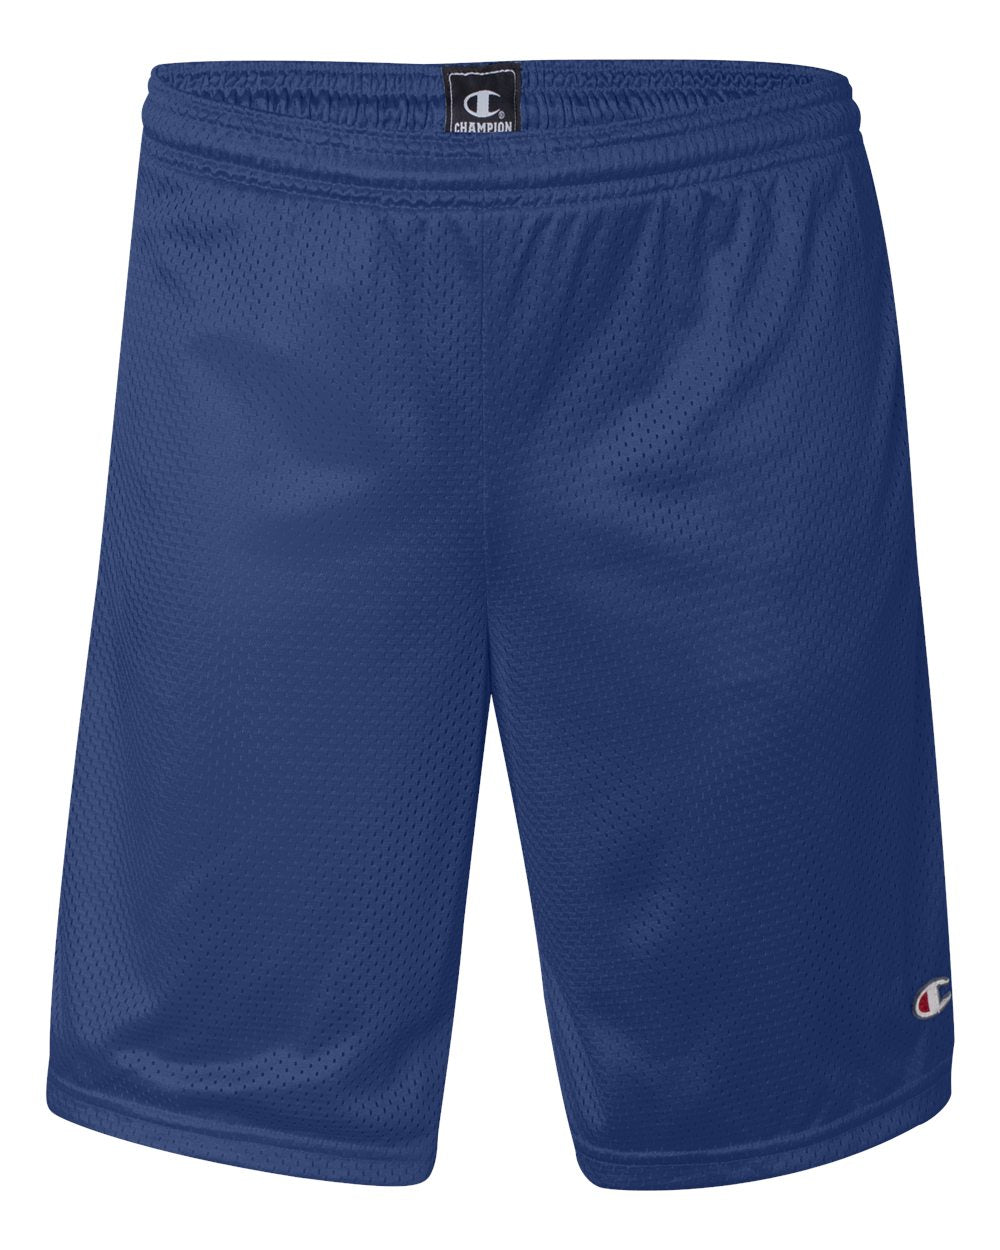 Polyester Mesh Shorts with Pockets - Champion S162